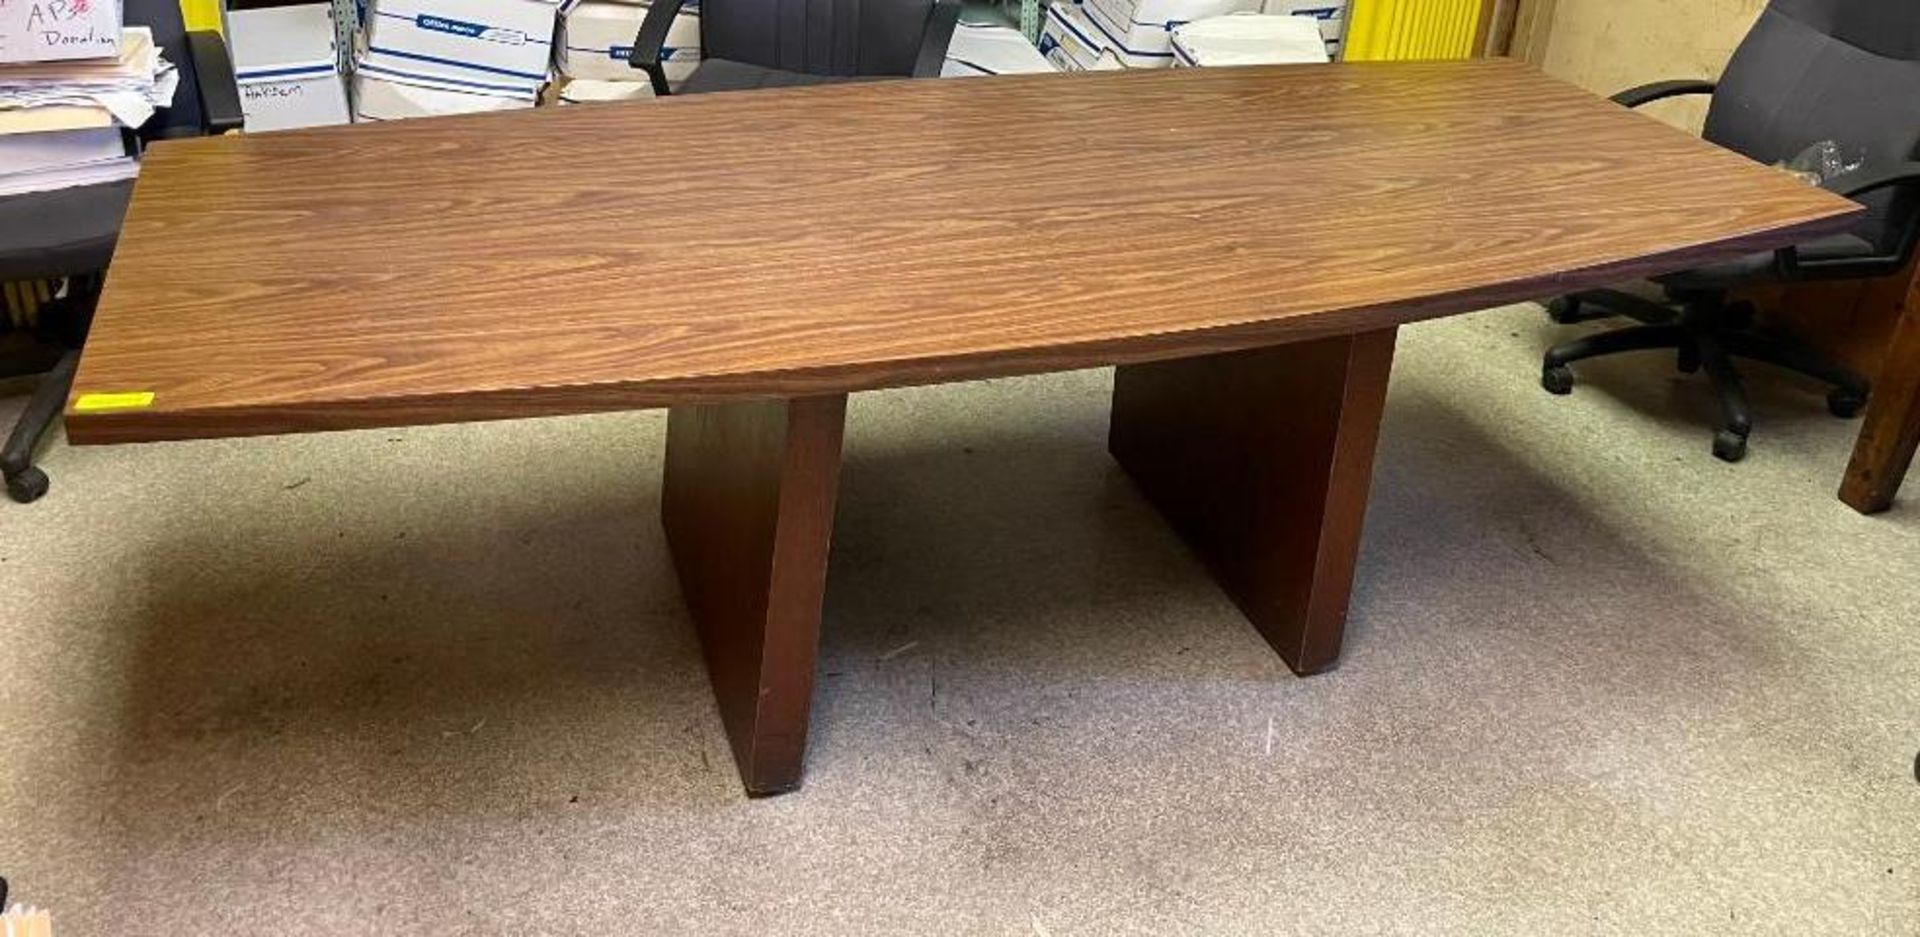 8' CONFERENCE TABLE SIZE: 96"X42"X30" LOCATION: OFFICE QTY: 1